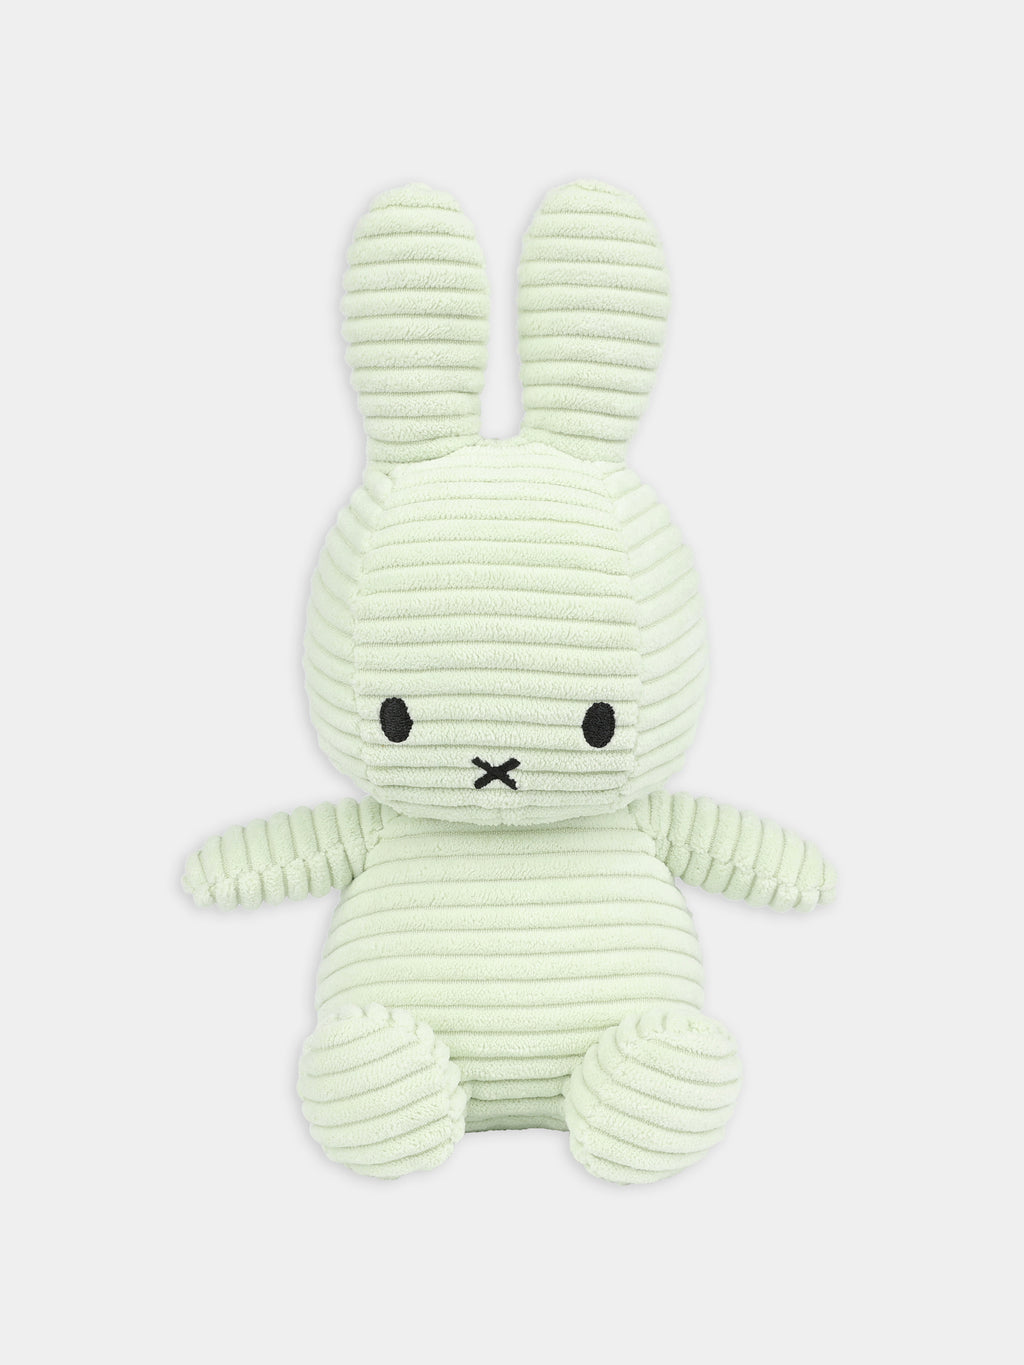 Green plush toy for kids